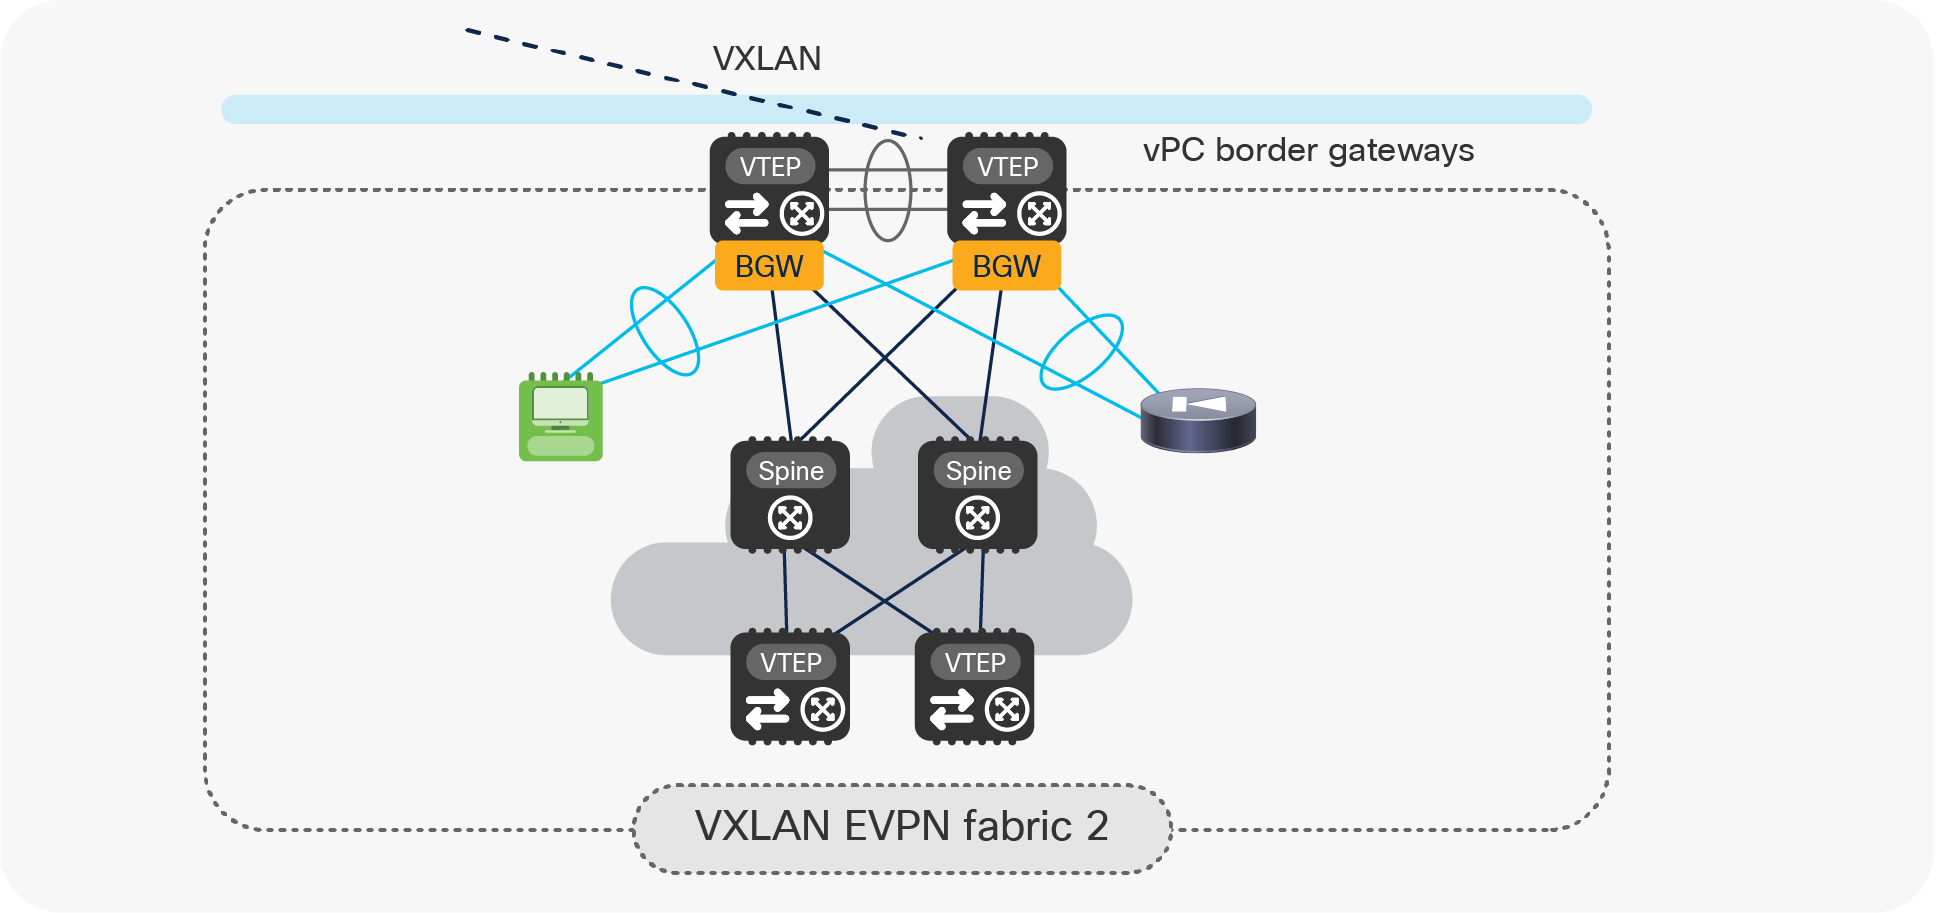 vPC BGW and endpoints